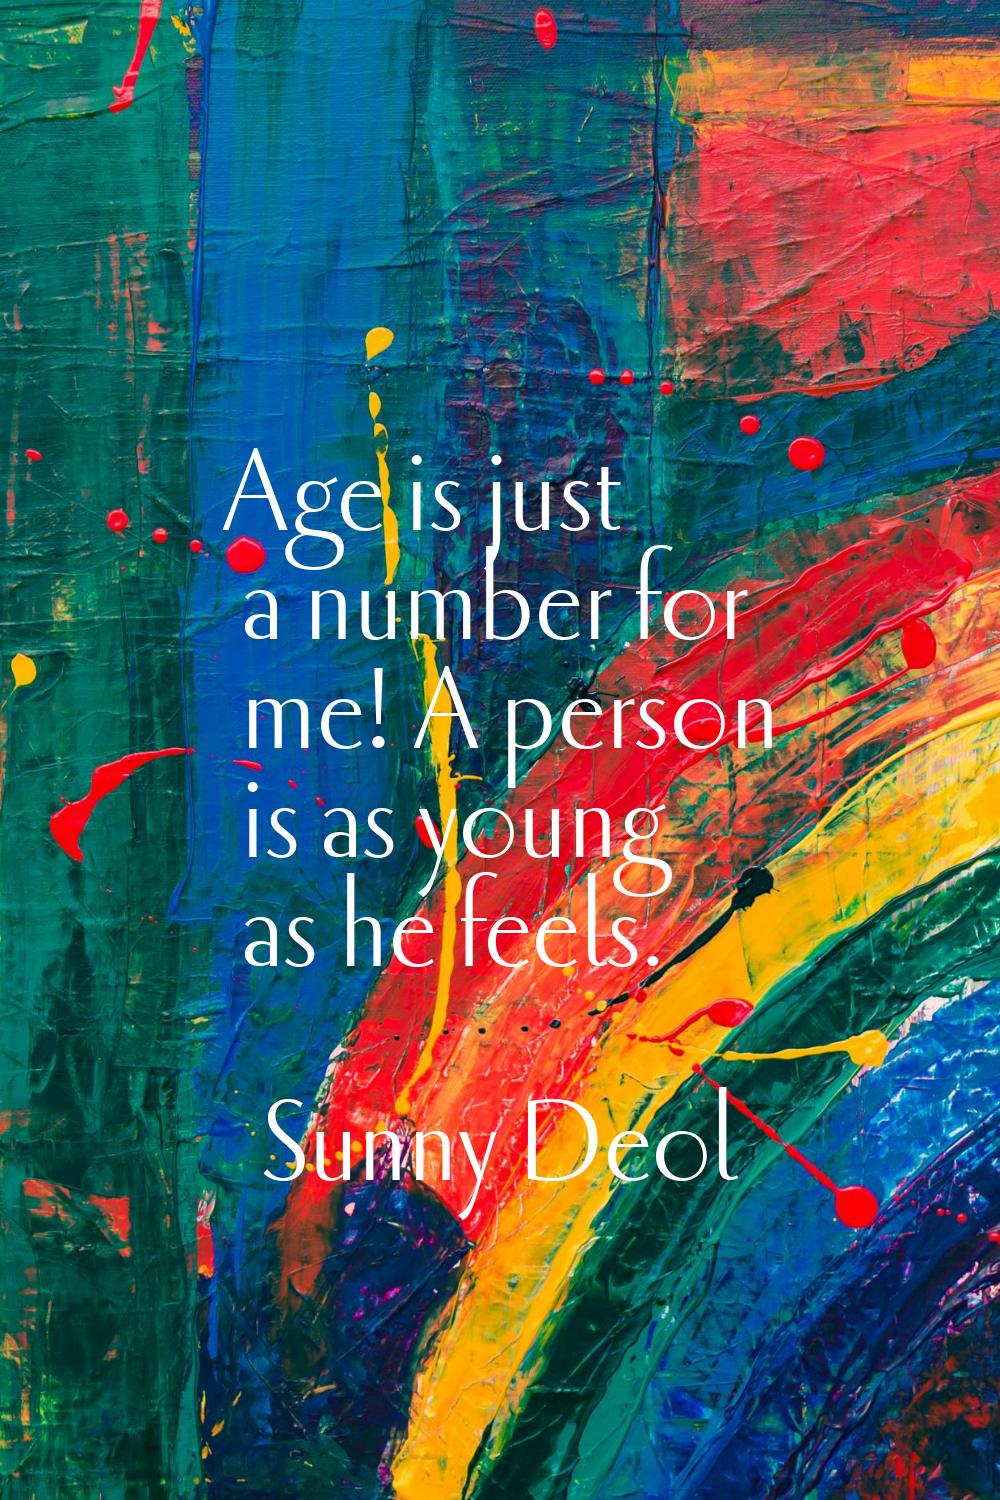 Age is just a number for me! A person is as young as he feels.